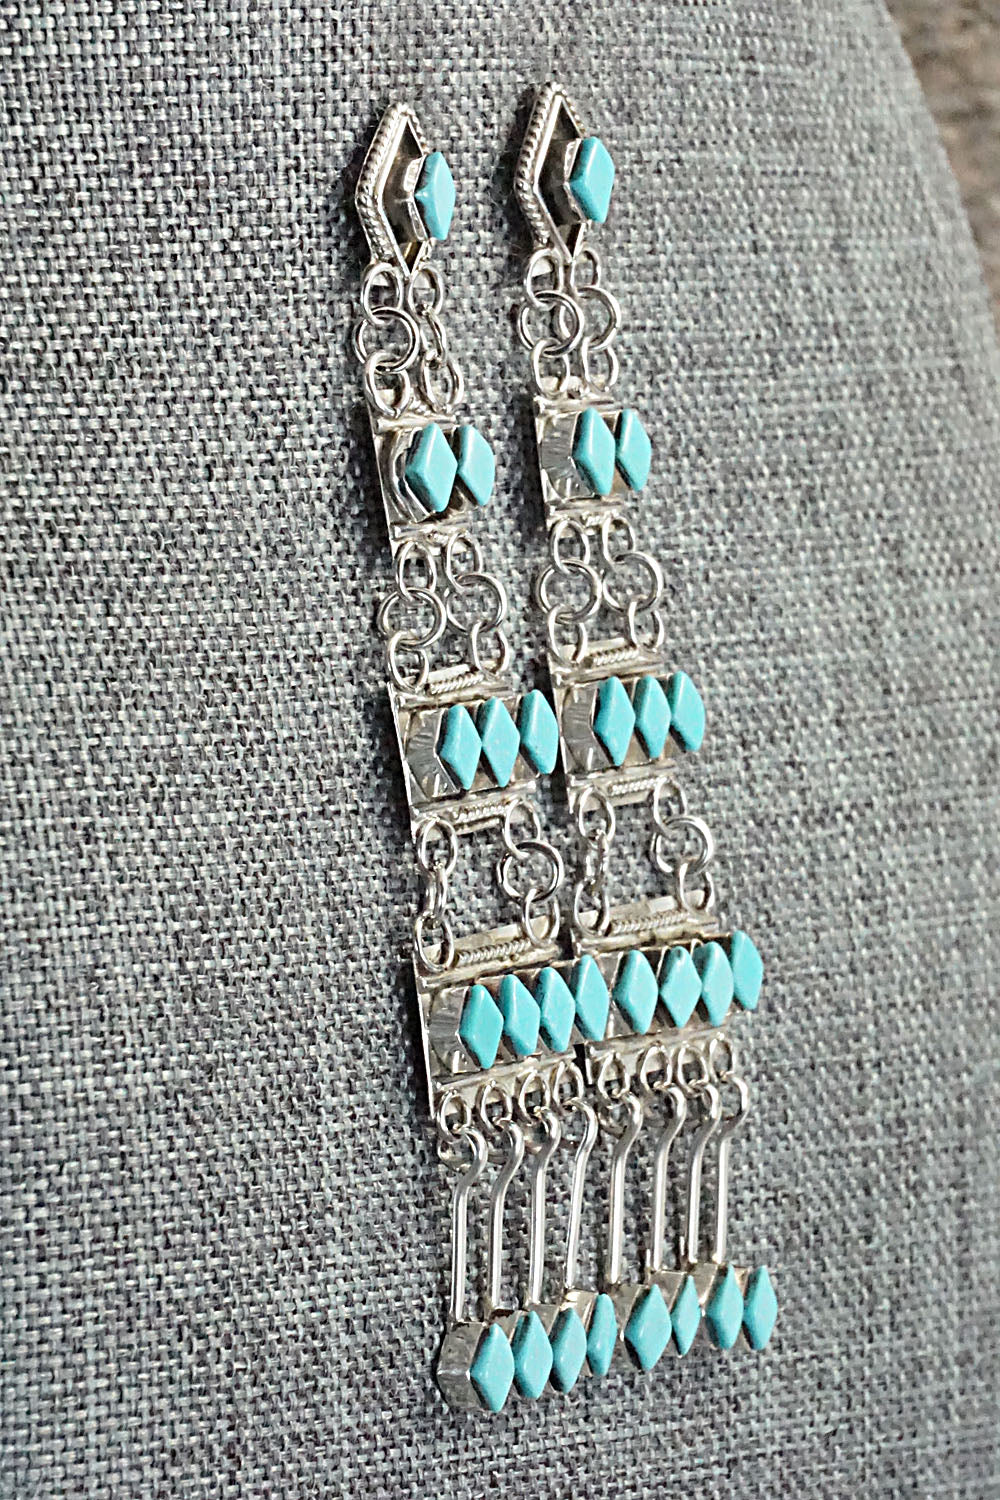 Turquoise & Sterling Silver Earrings - Priscilla Chavez